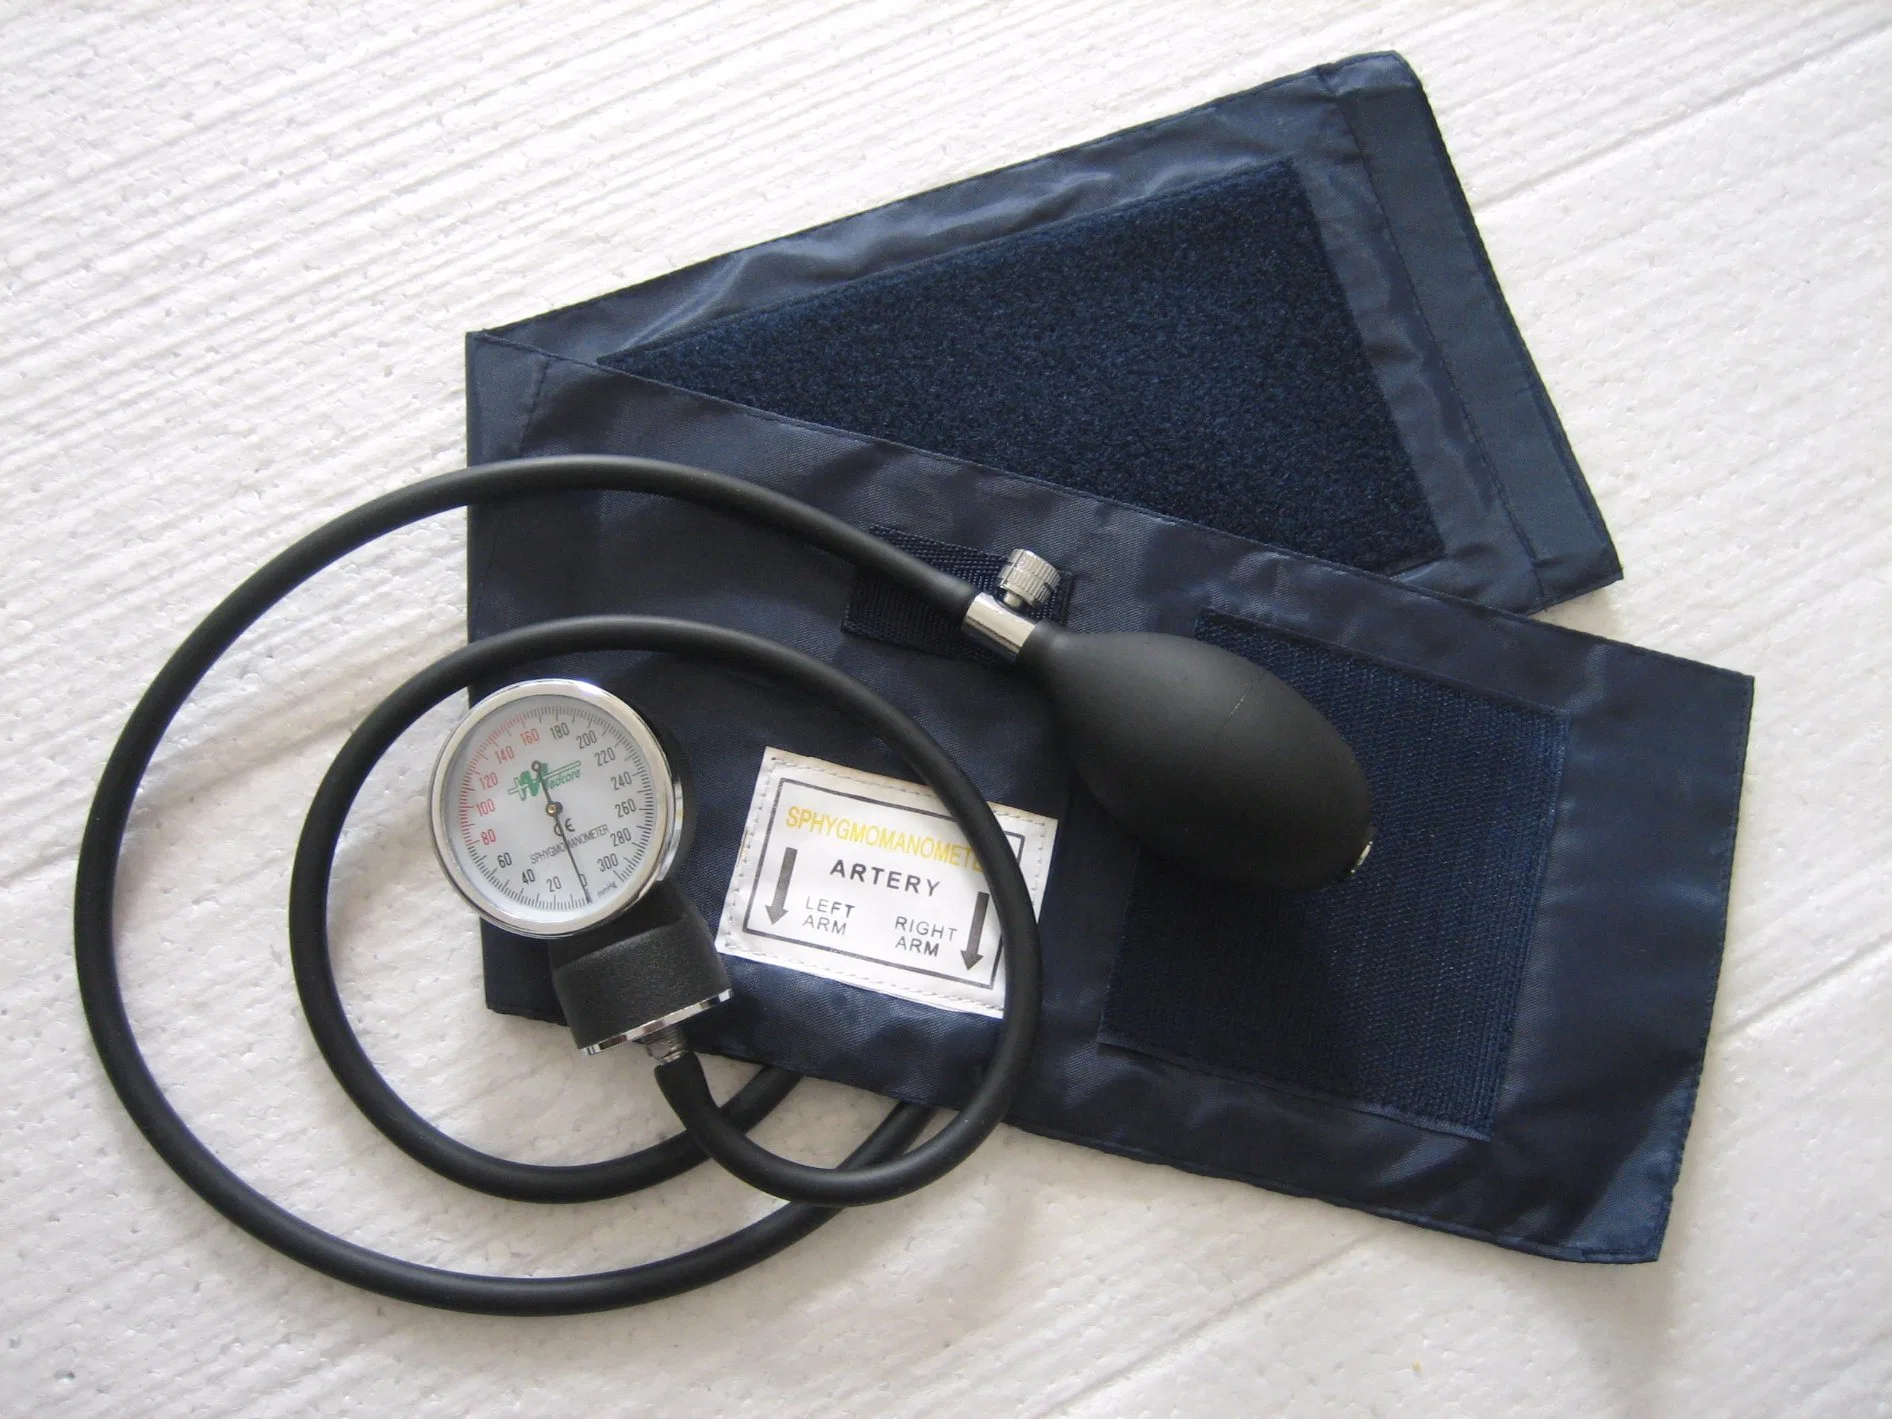 Blood Pressure Monitor, Portable Medical or Household Aneroid Sphygmomanomete